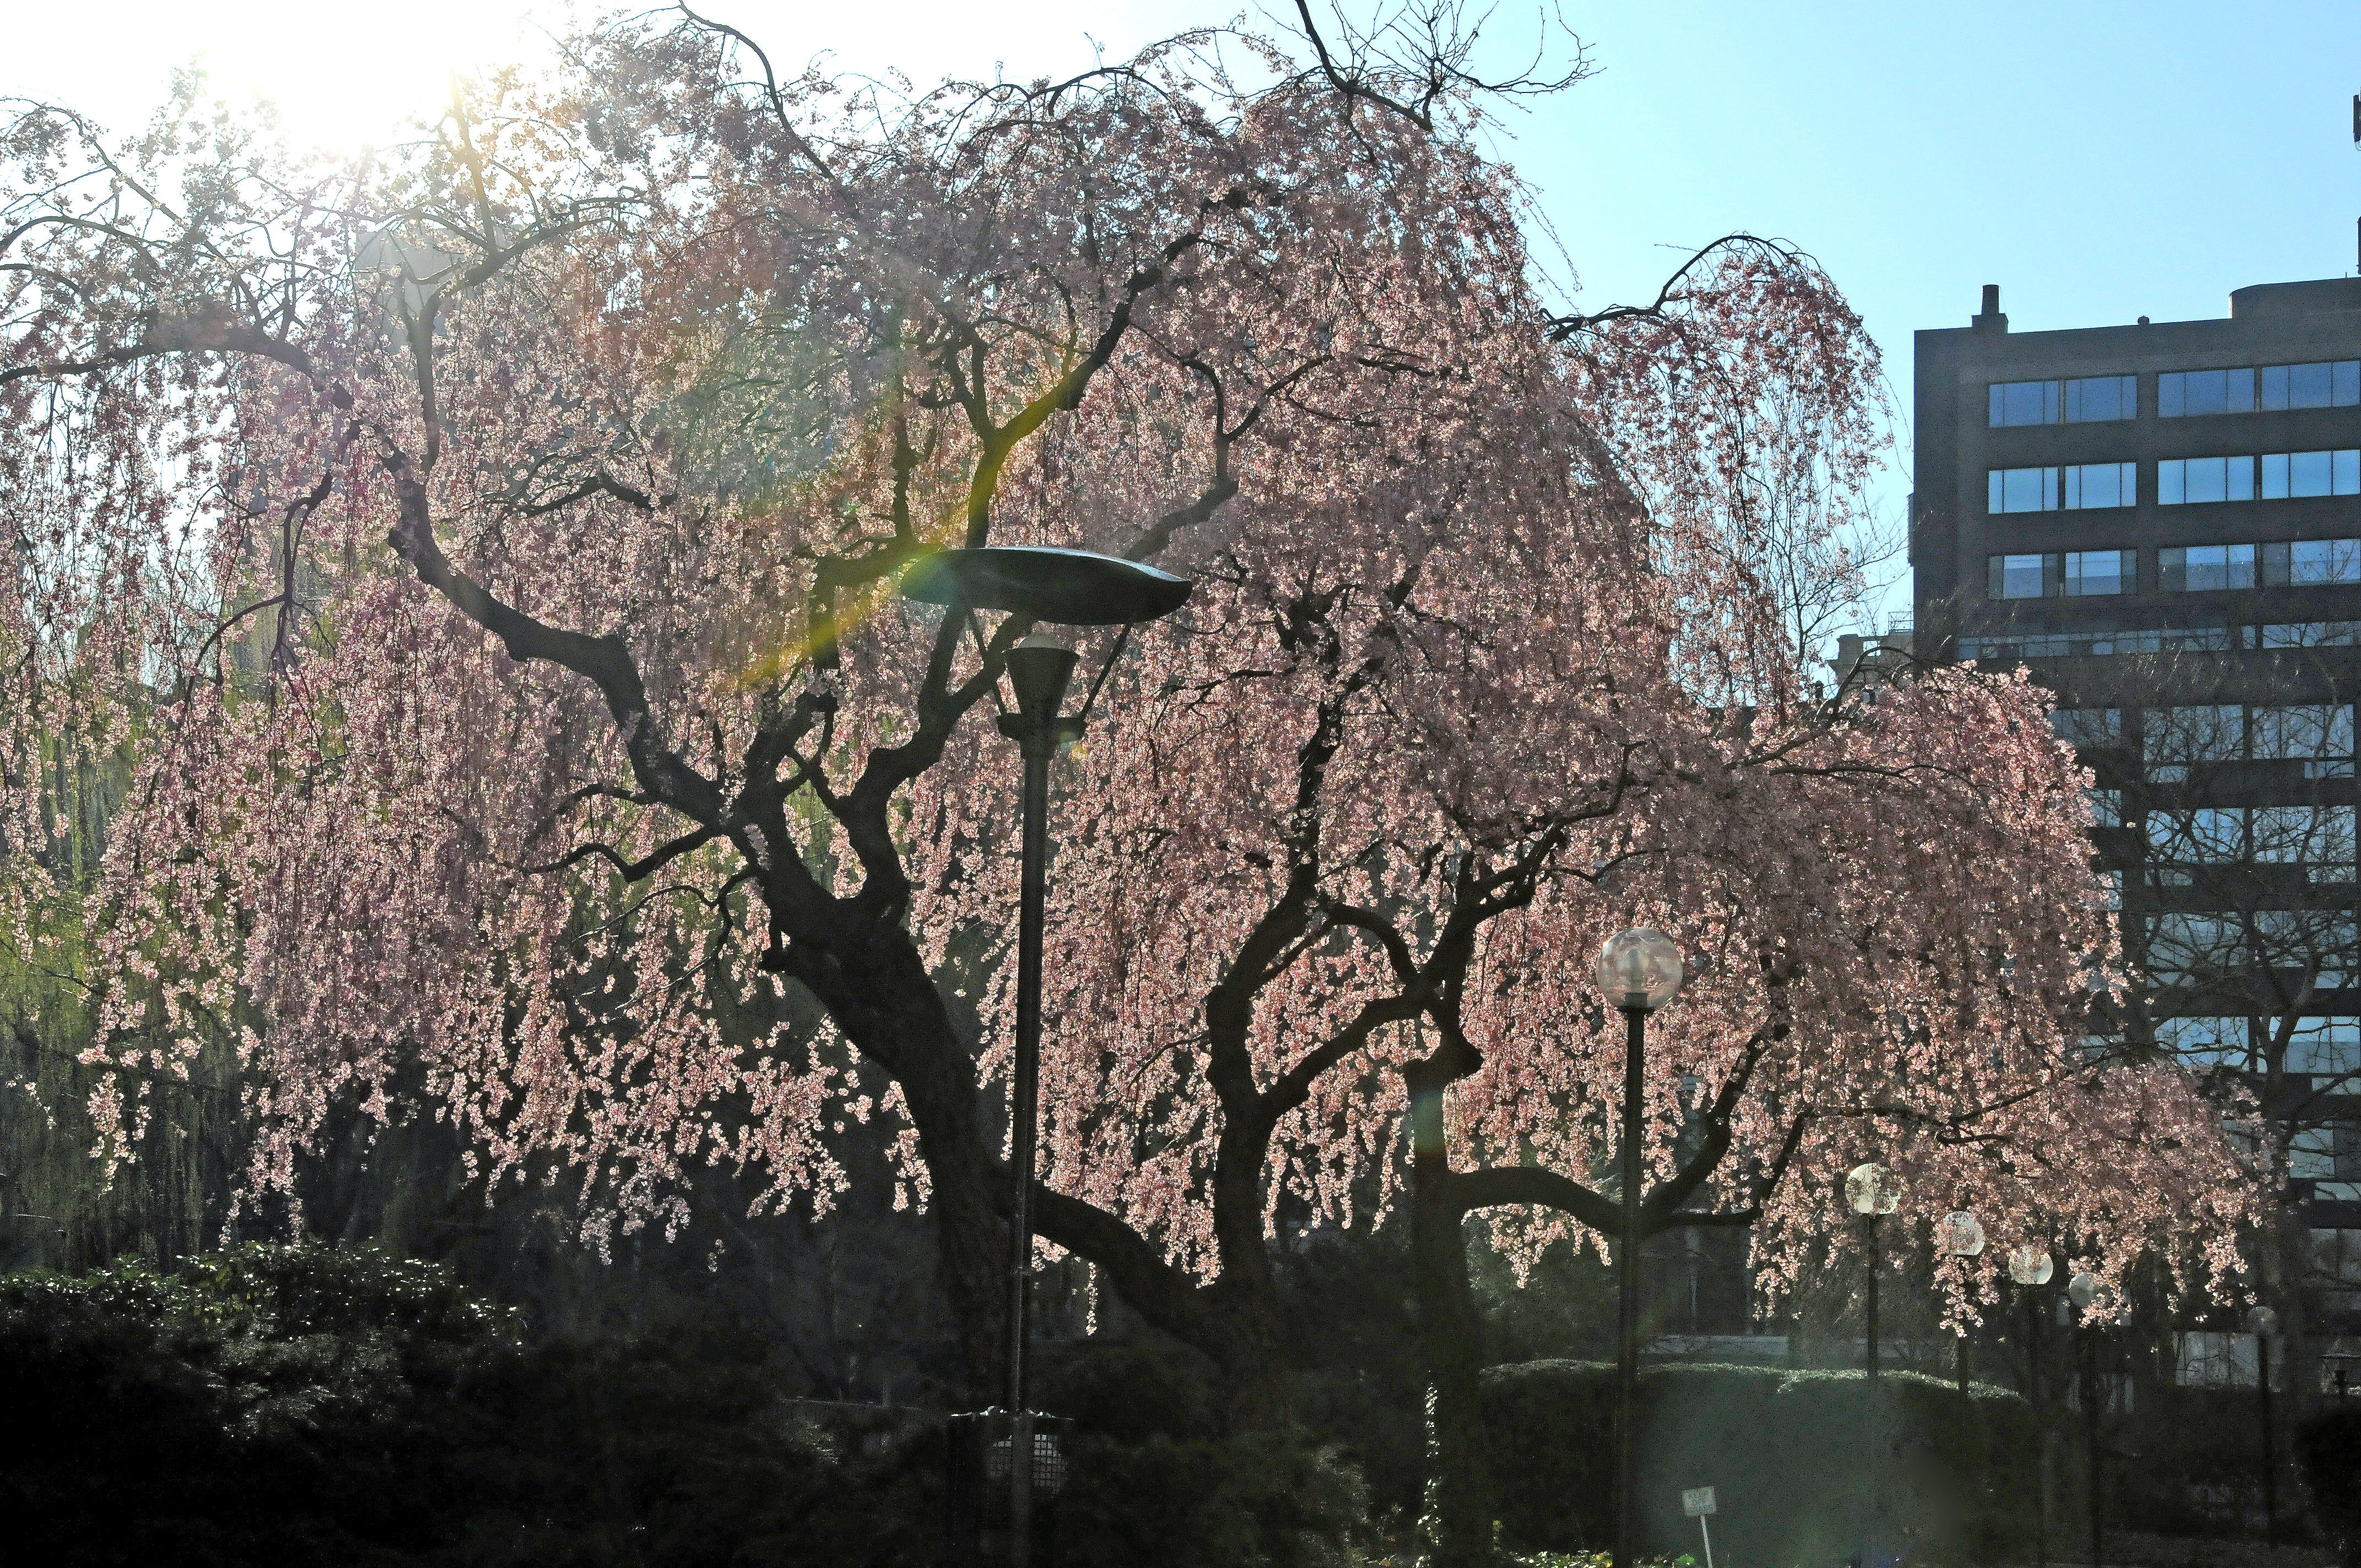 Weeping Cherry Tree Blossoms